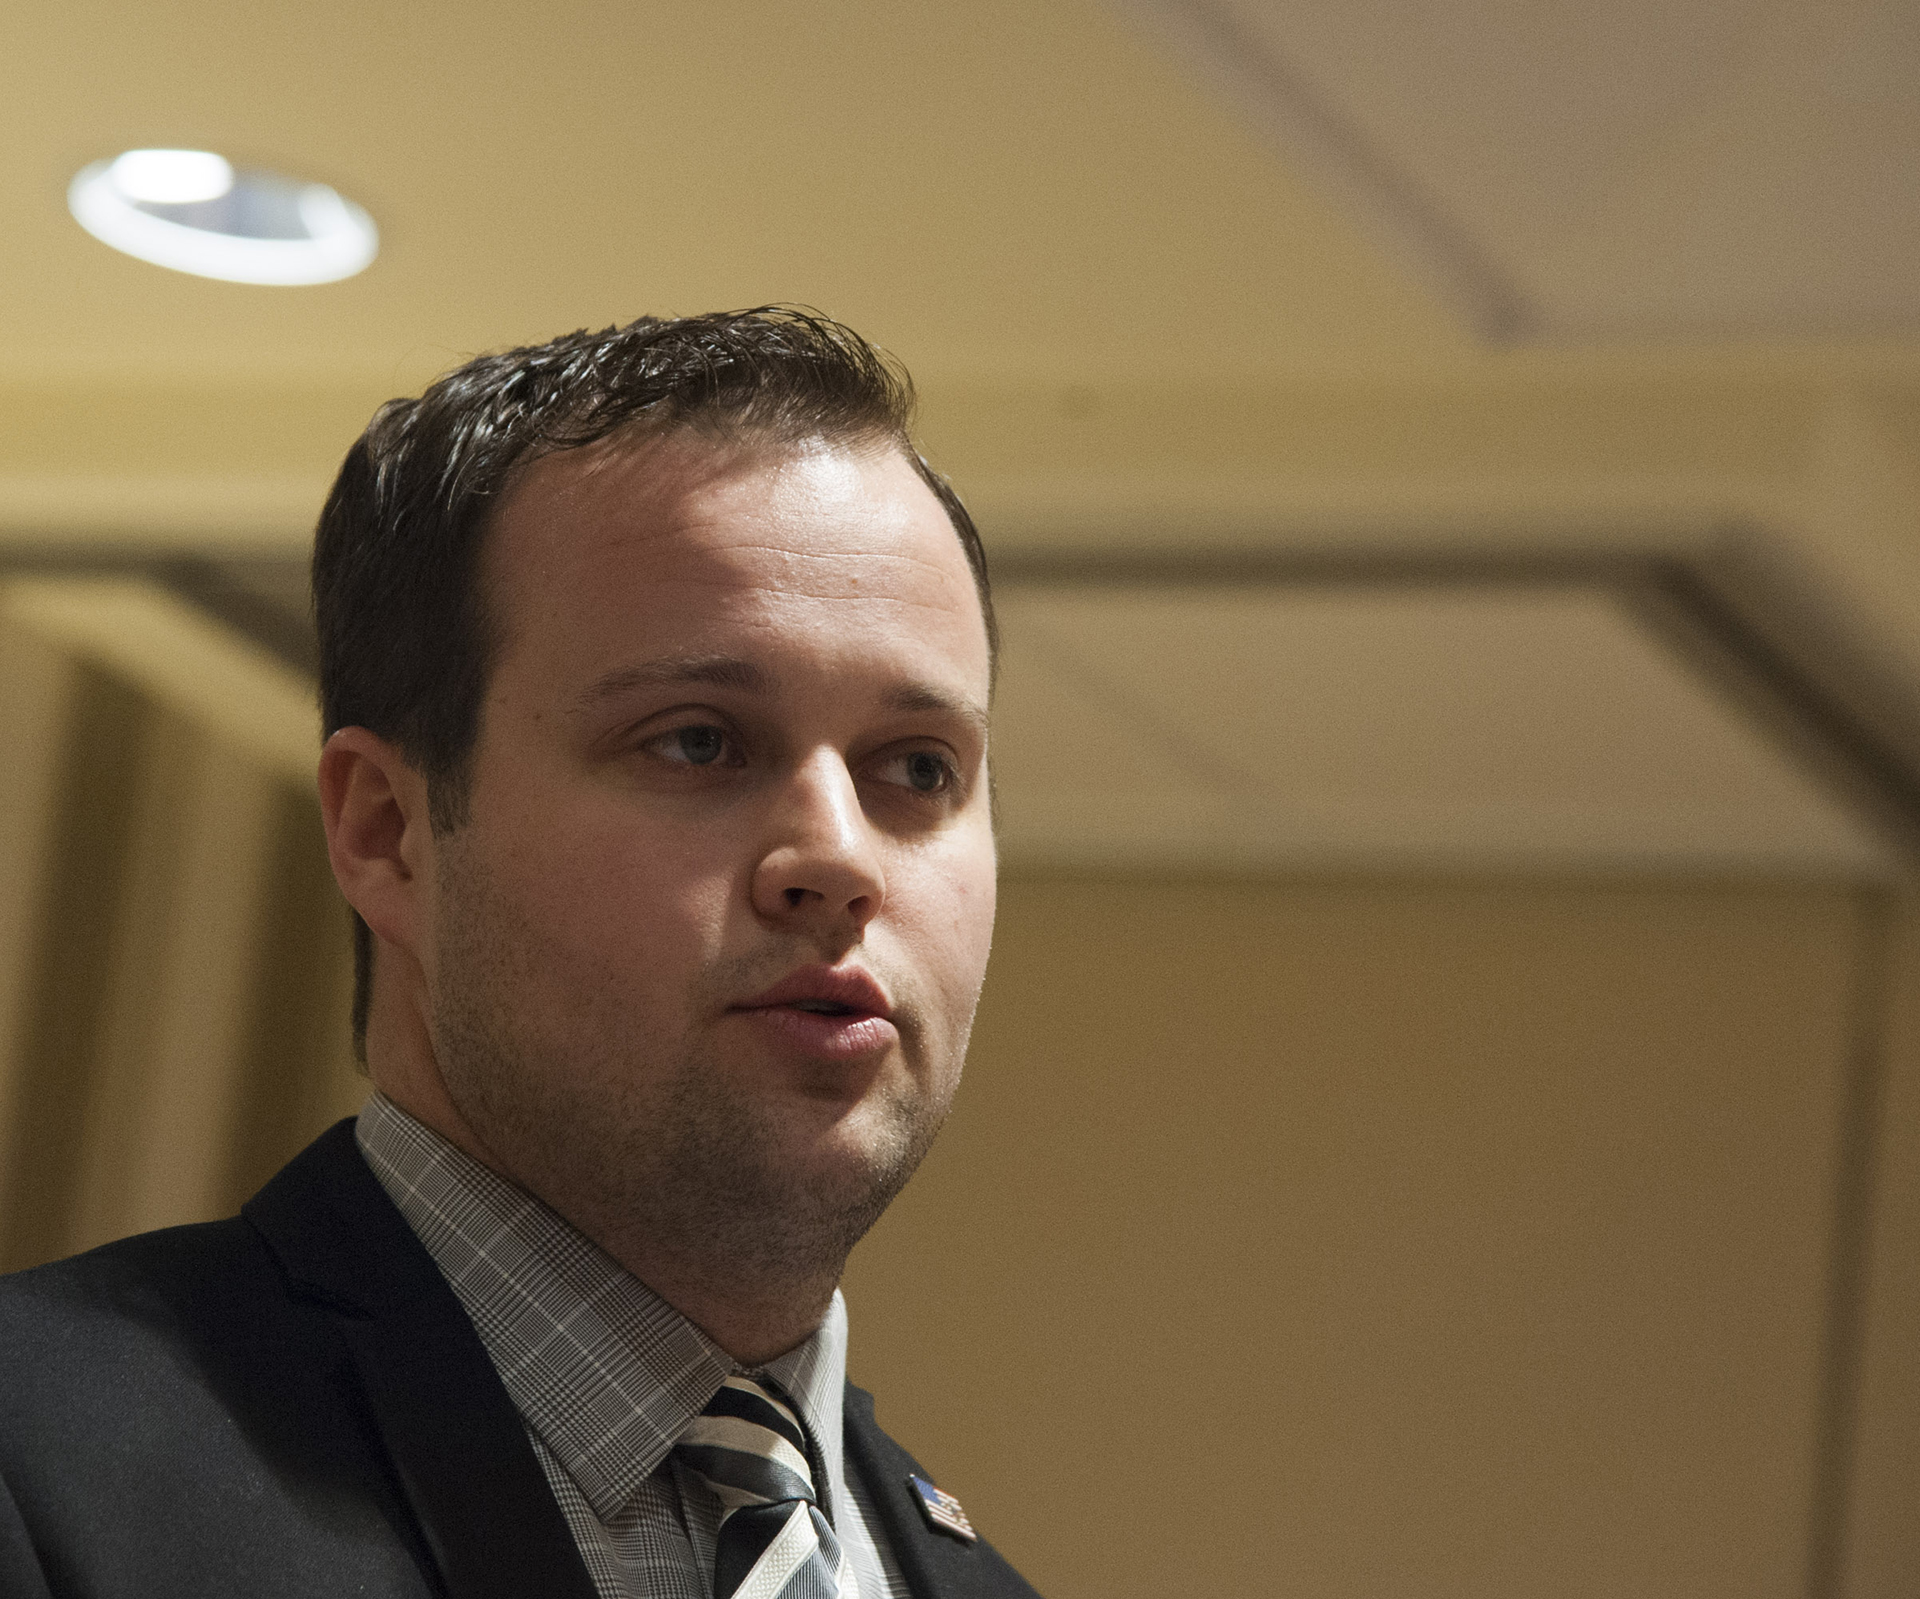 Josh Duggar admits to cheating on his wife and pornography addiction